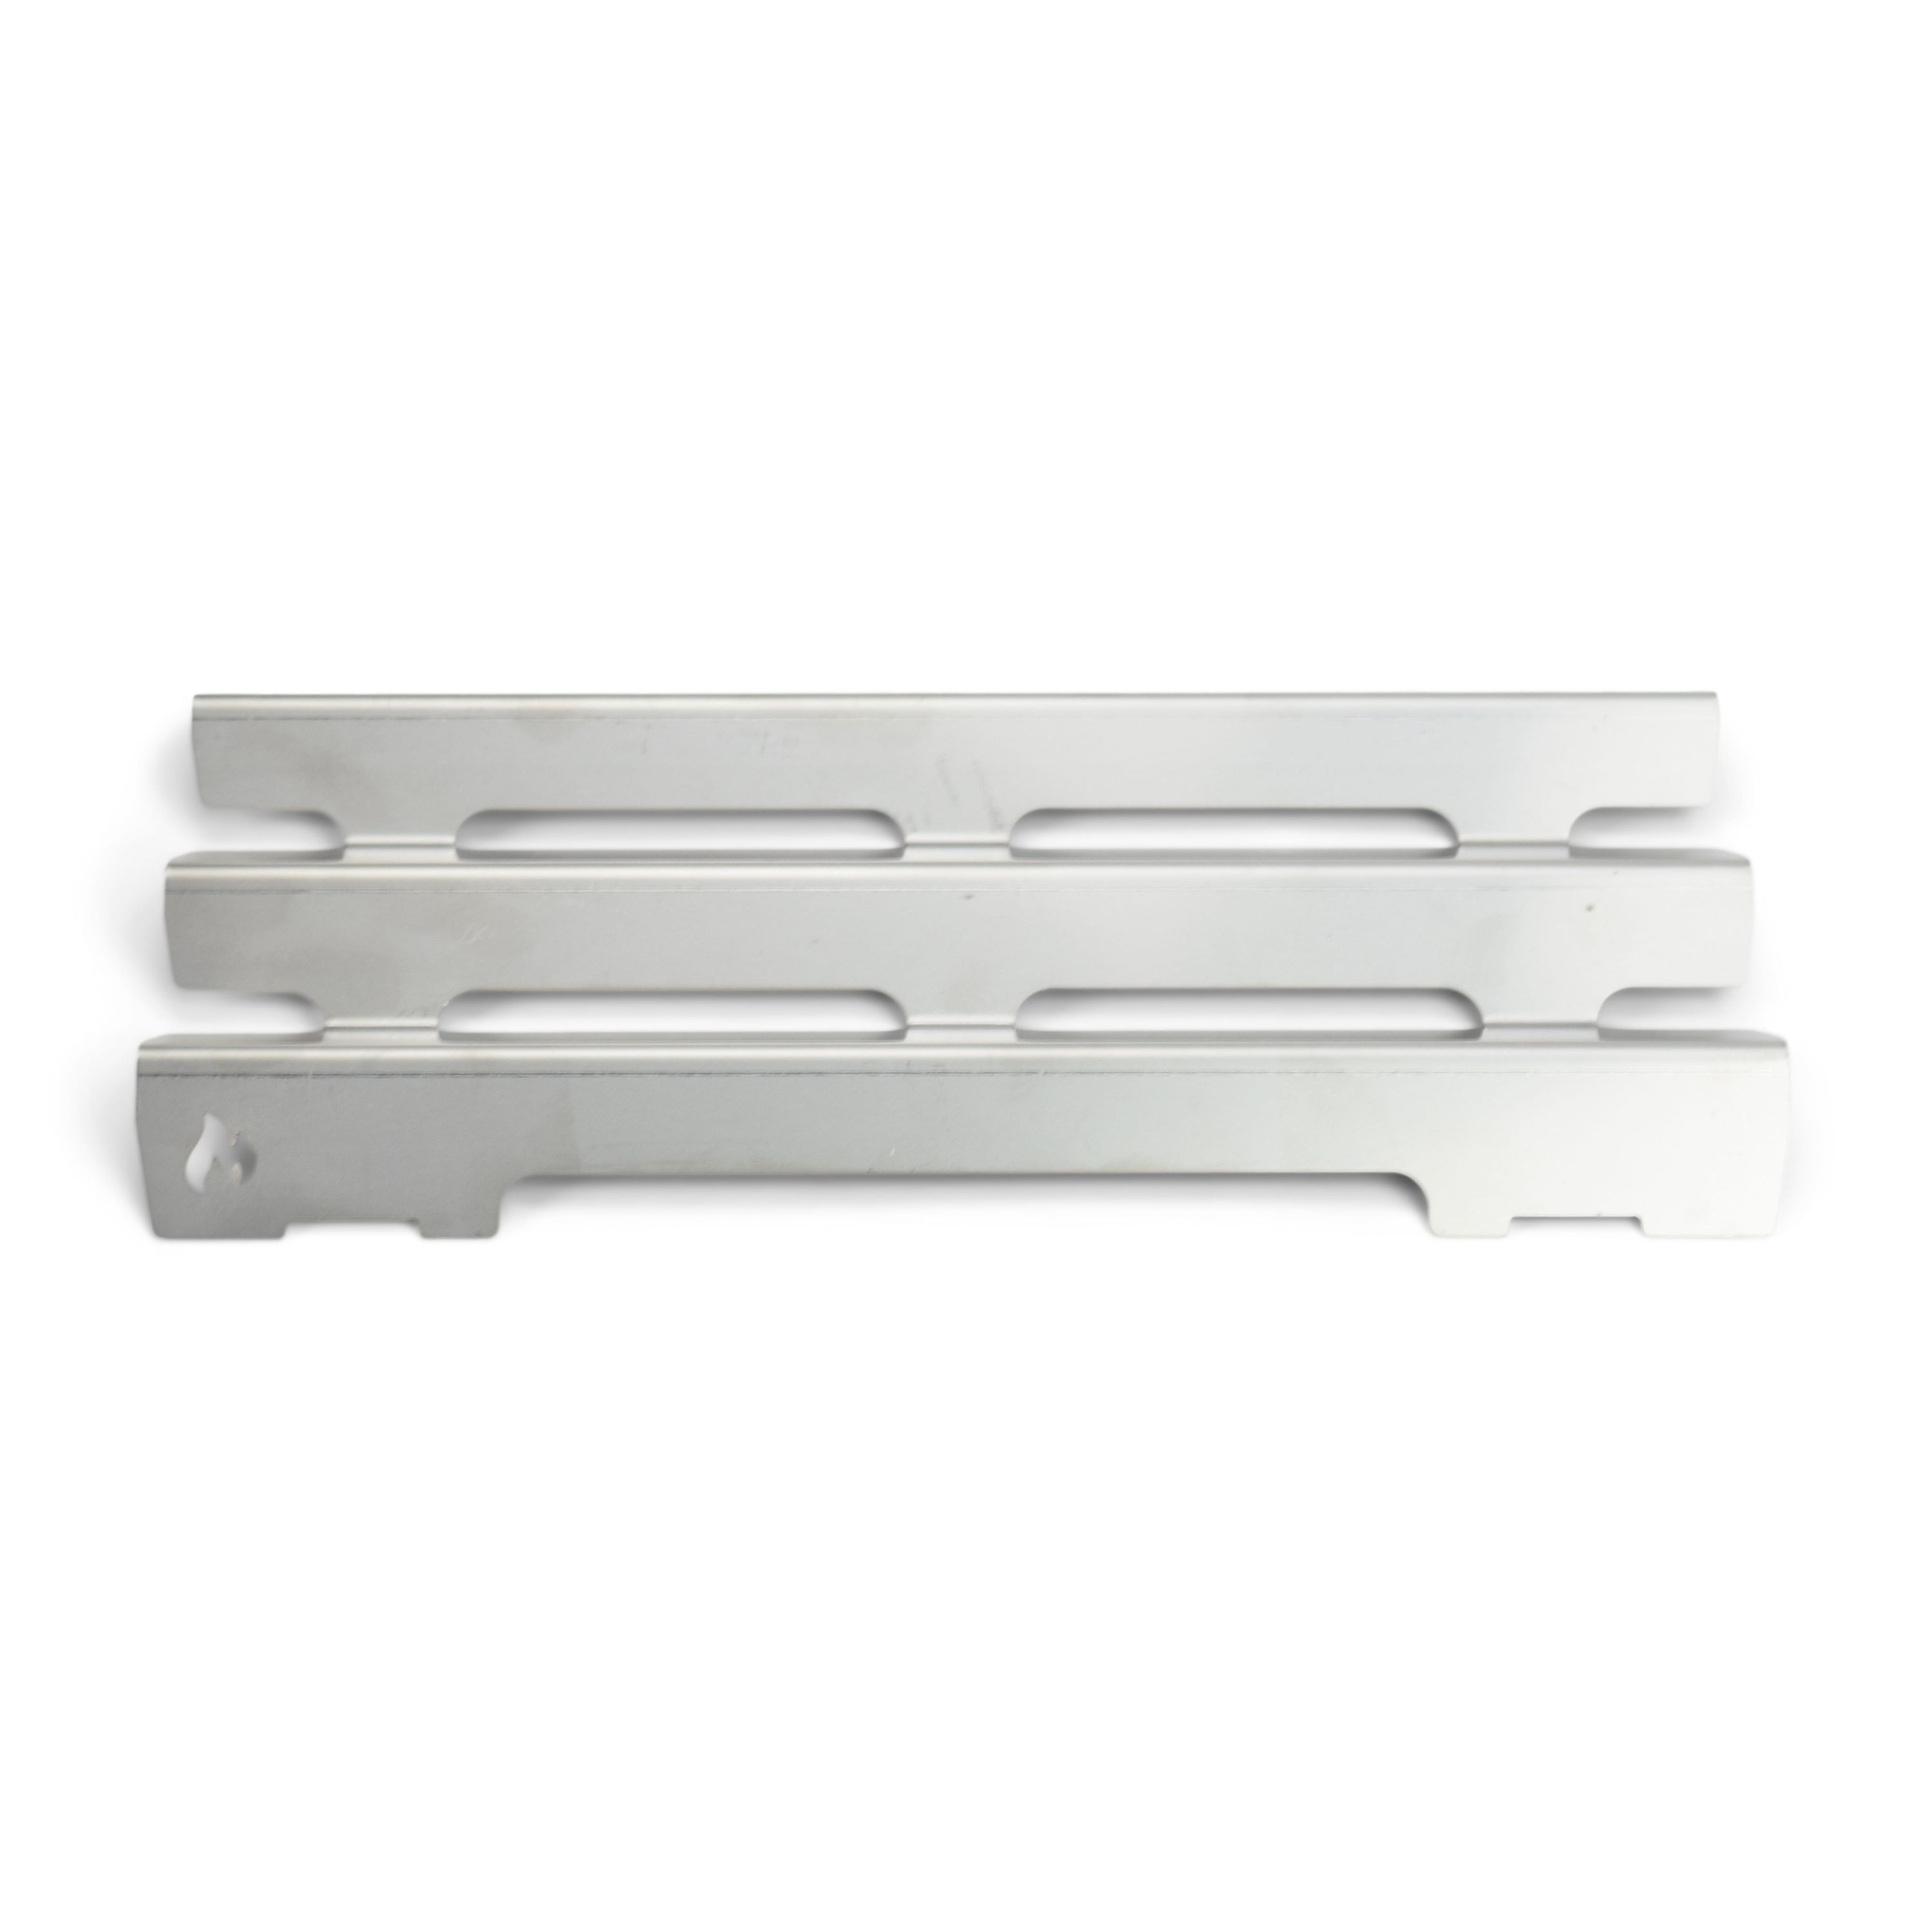 Aroma rail for Broil King GEM 310 320 330 340 & Porta Chef 320 Better than the original "Flav-R-Wave".